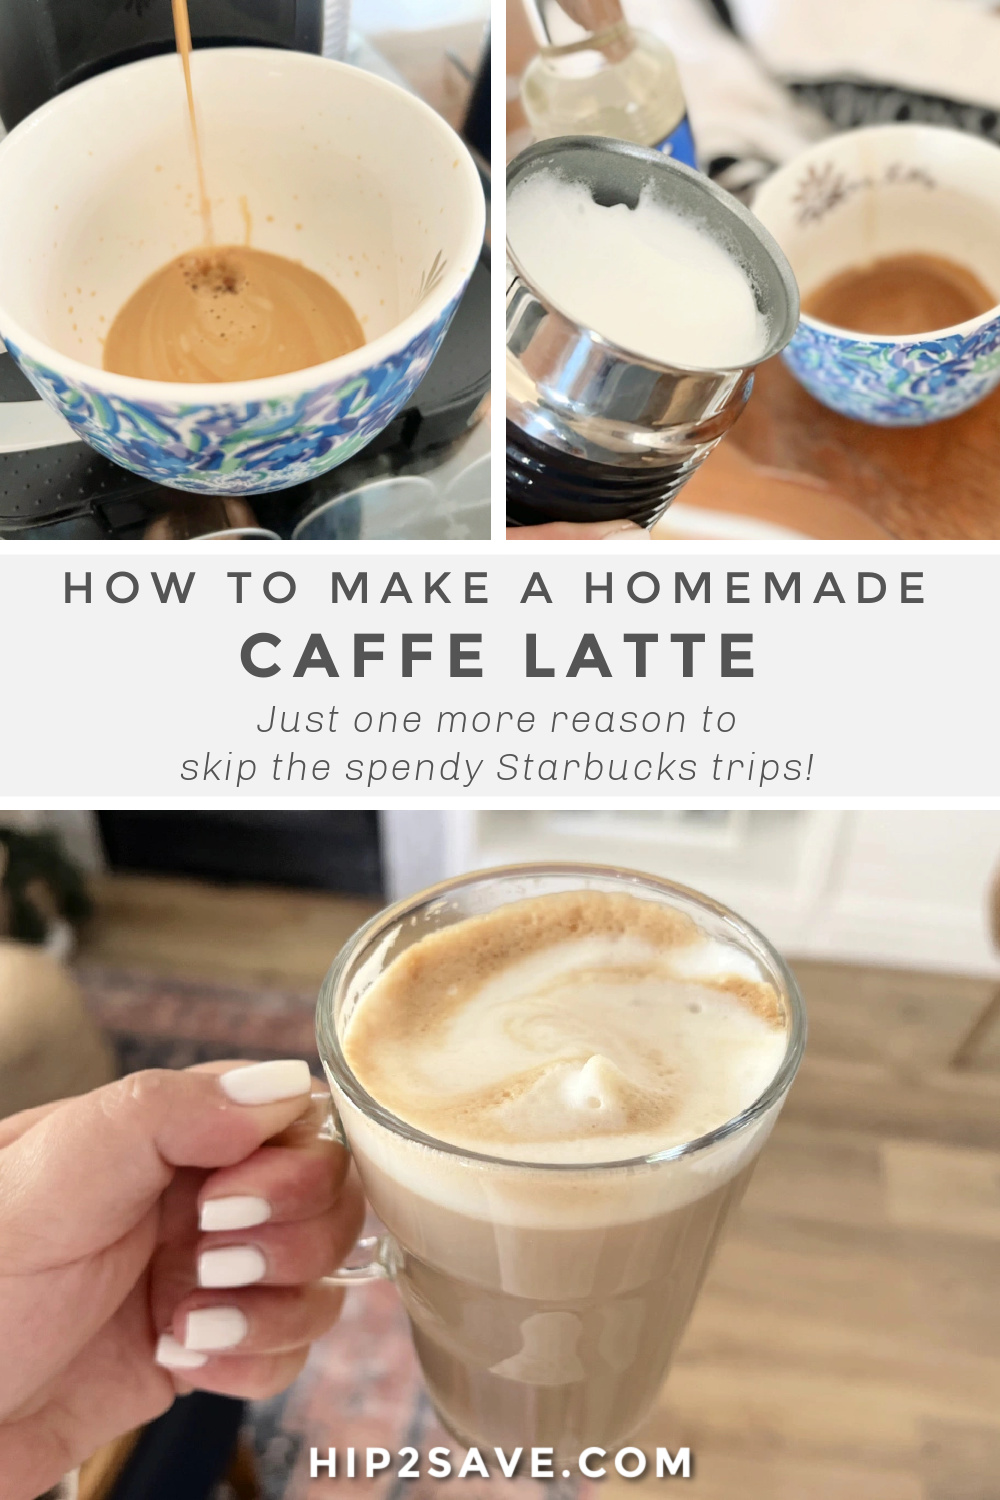 How to Make a Latte at Home